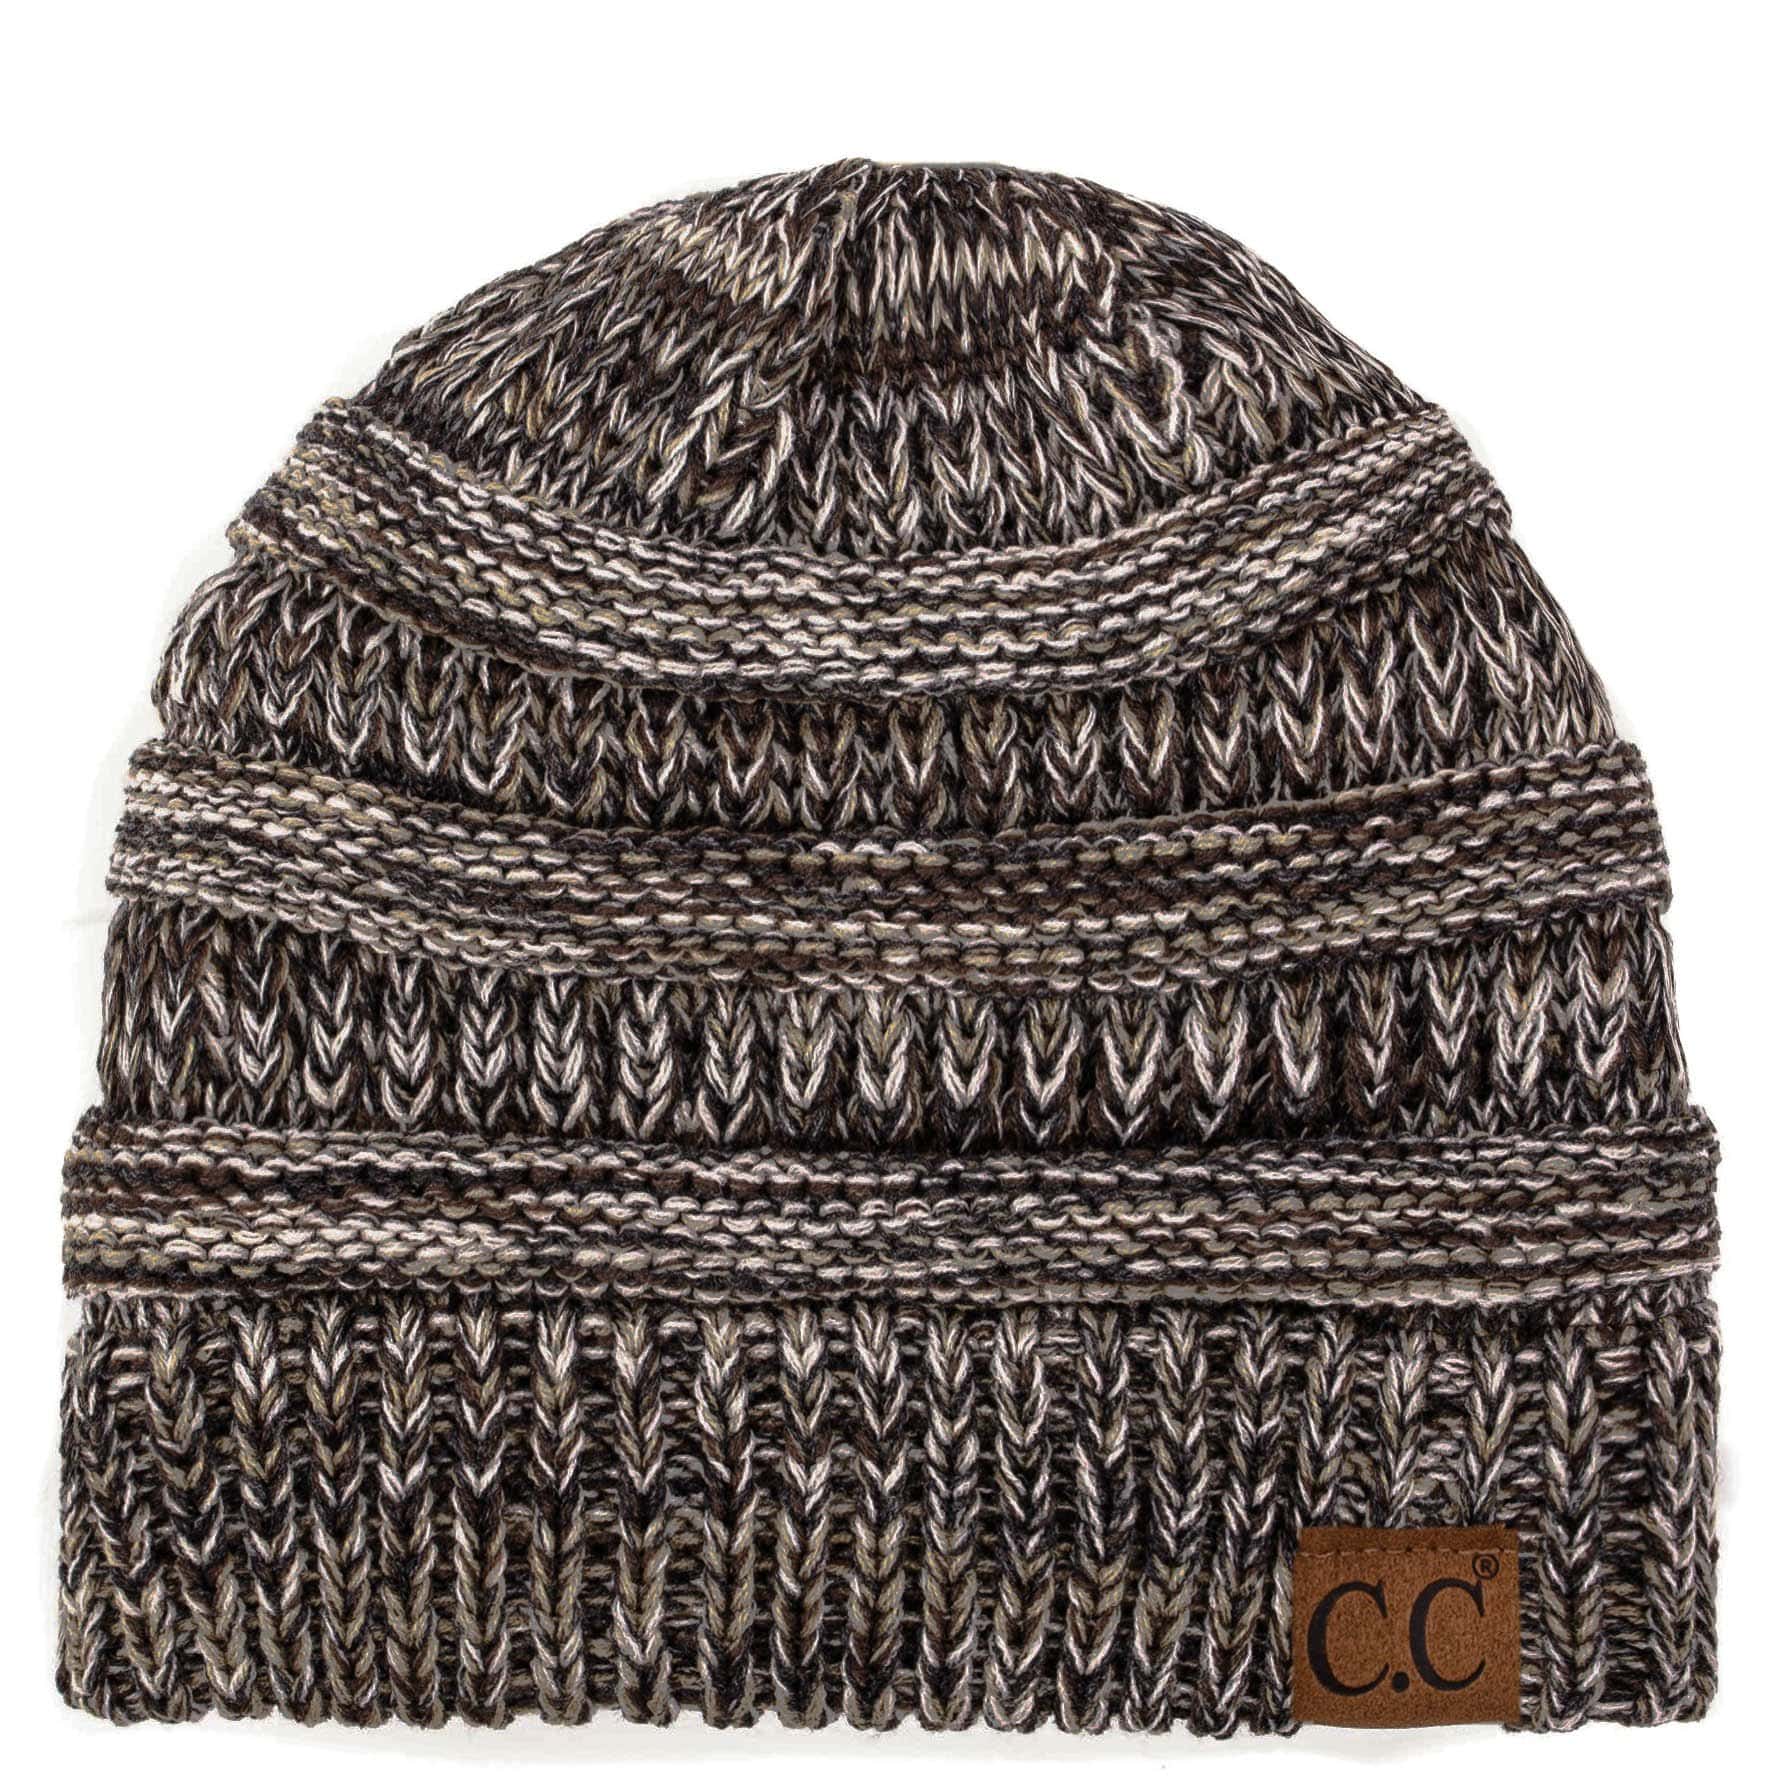 C.C Apparel Three Tone Brown C.C Trendy Warm Chunky Soft Stretch Three-Toned Cable Knit Beanie Skully